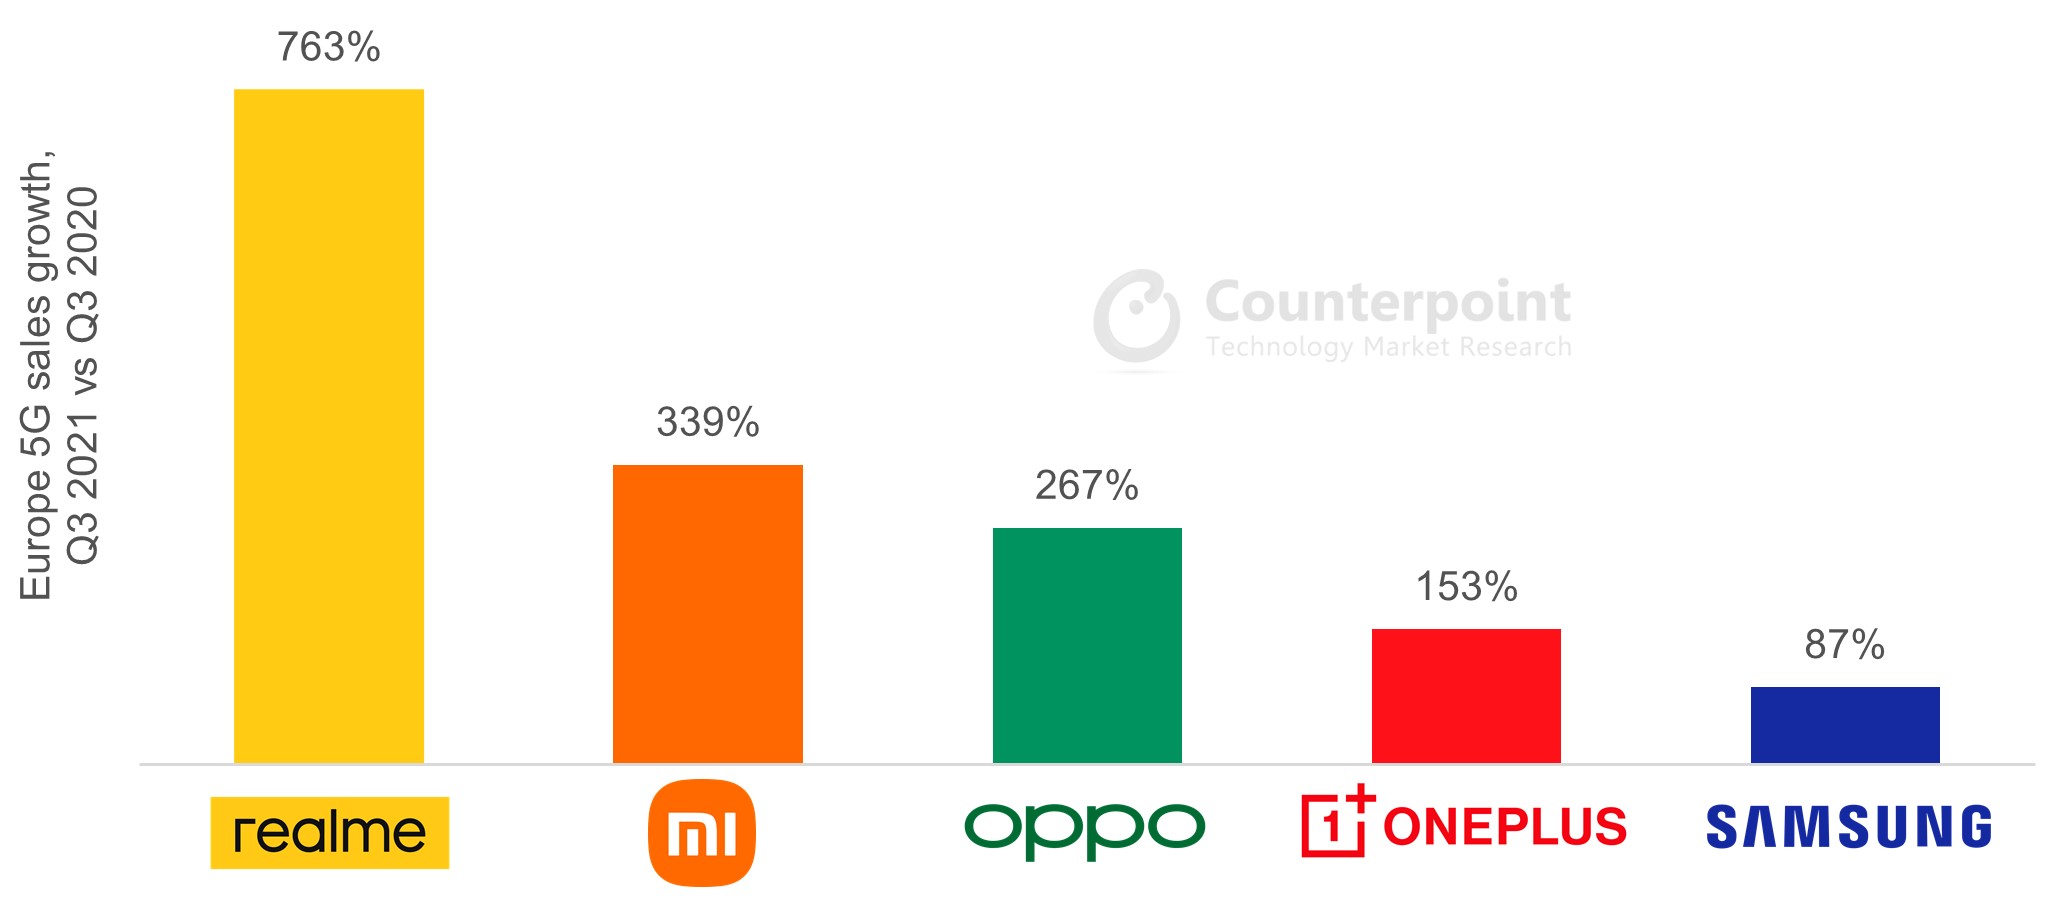 Counterpoint Research realme fastest growing major 5G Android brand in Europe